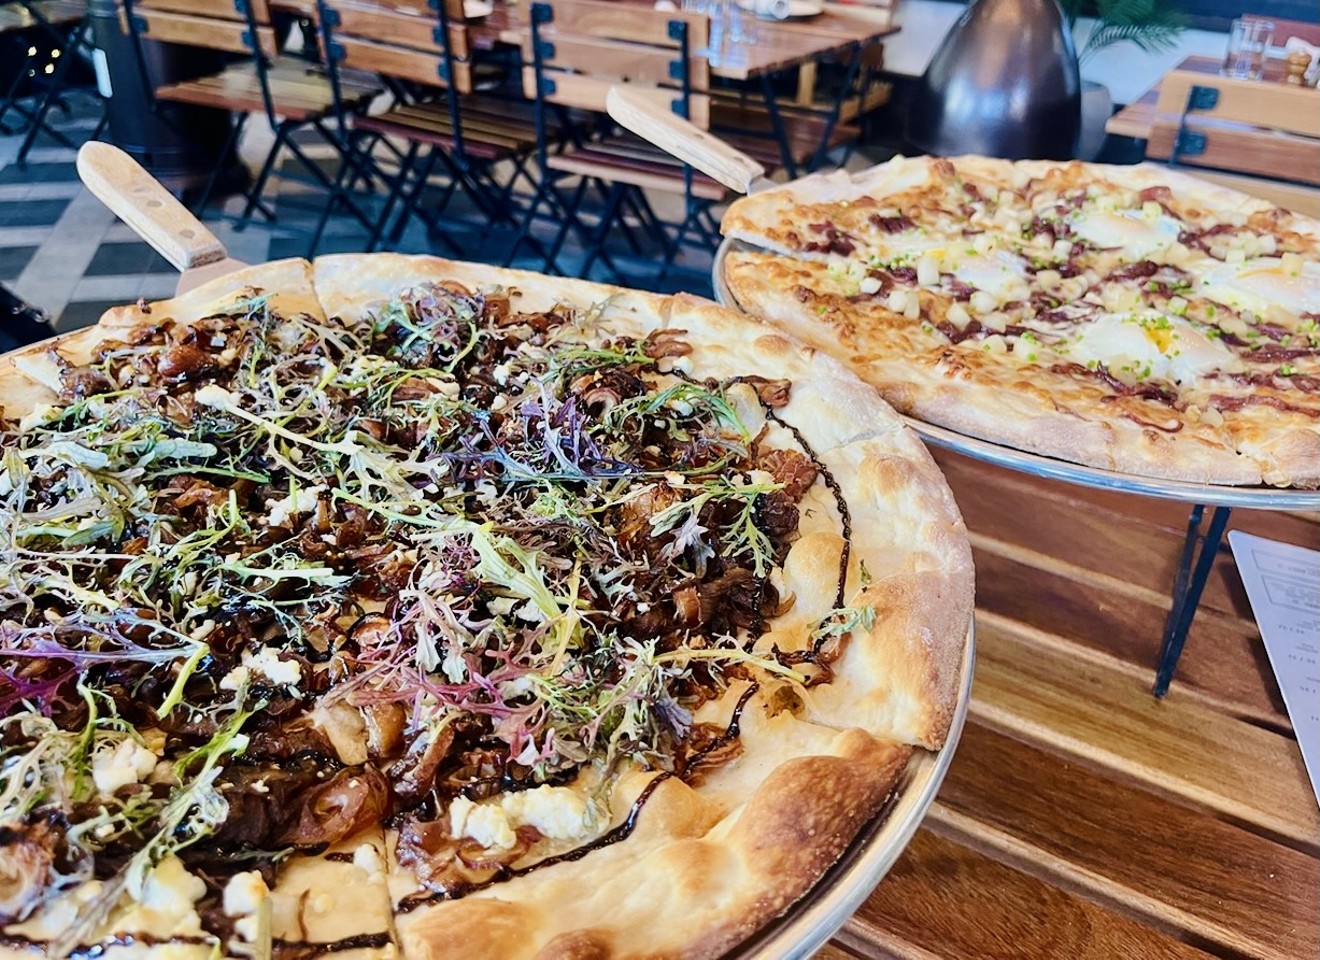 Try the Goat pizza, dressed in dates and sweet balsamic glaze.